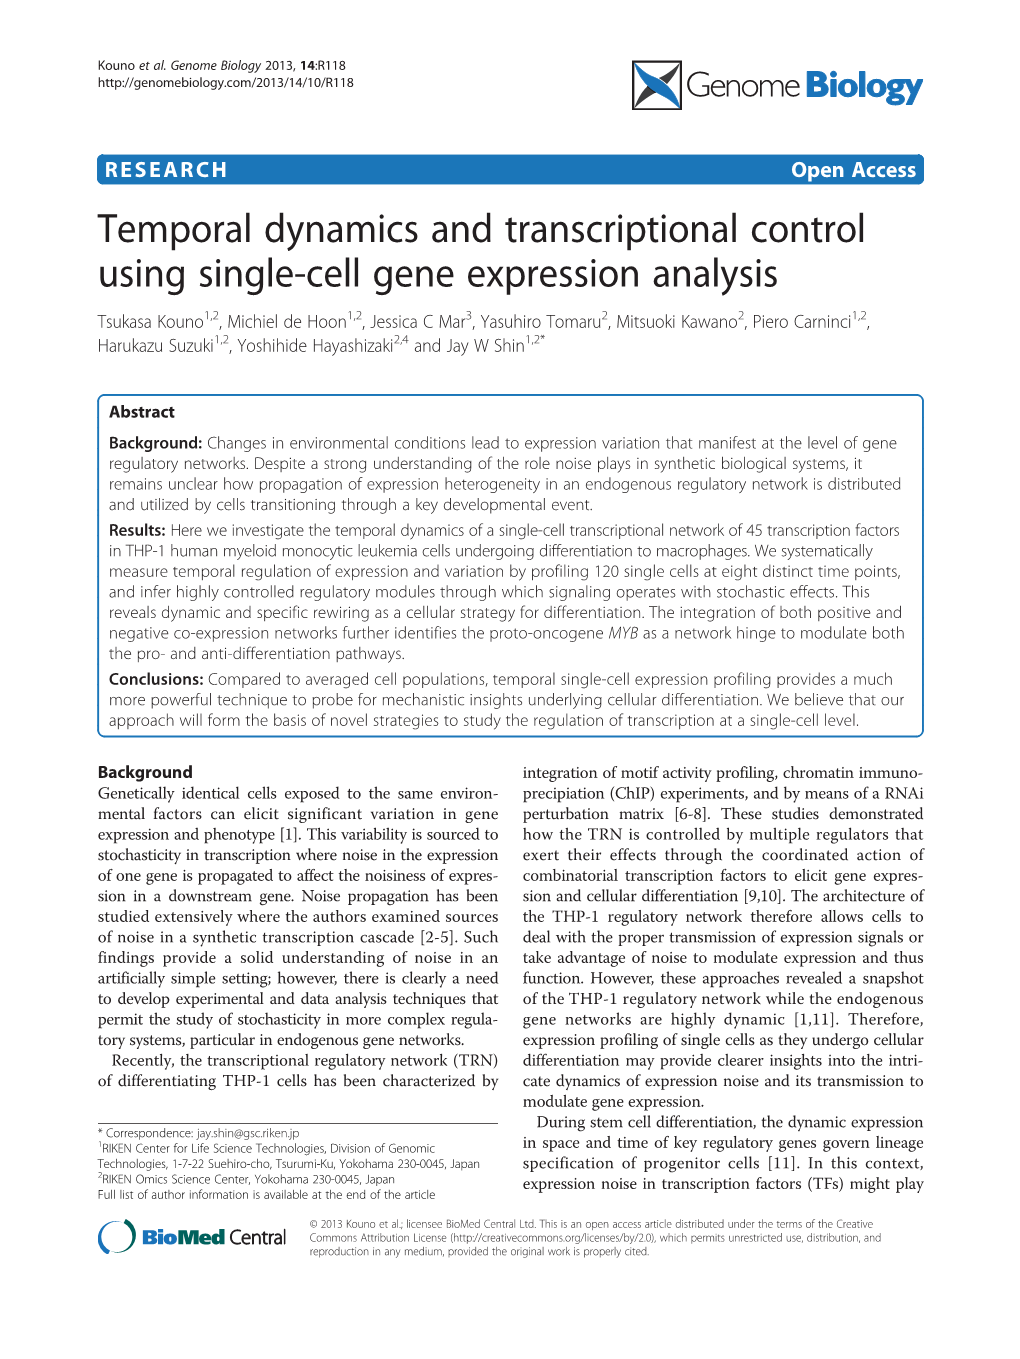 Temporal Dynamics and Transcriptional Control Using Single